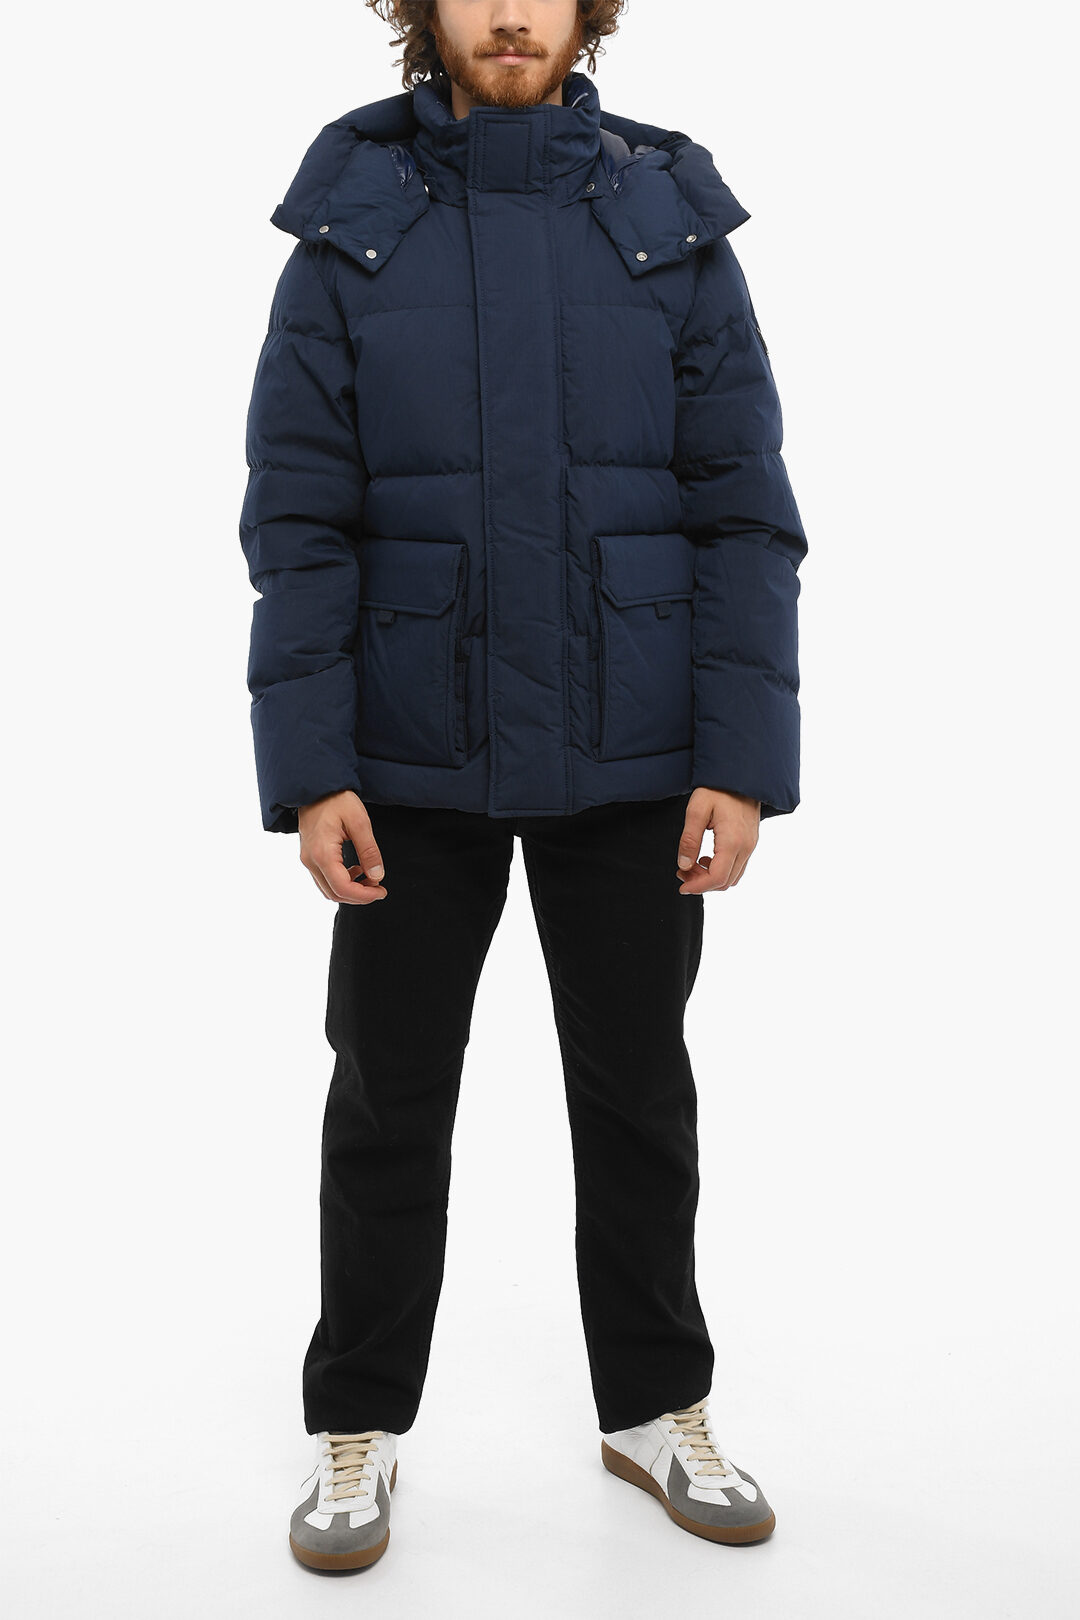 Woolrich Solid Color ASPEN Down Jacket with Removable Hood men ...